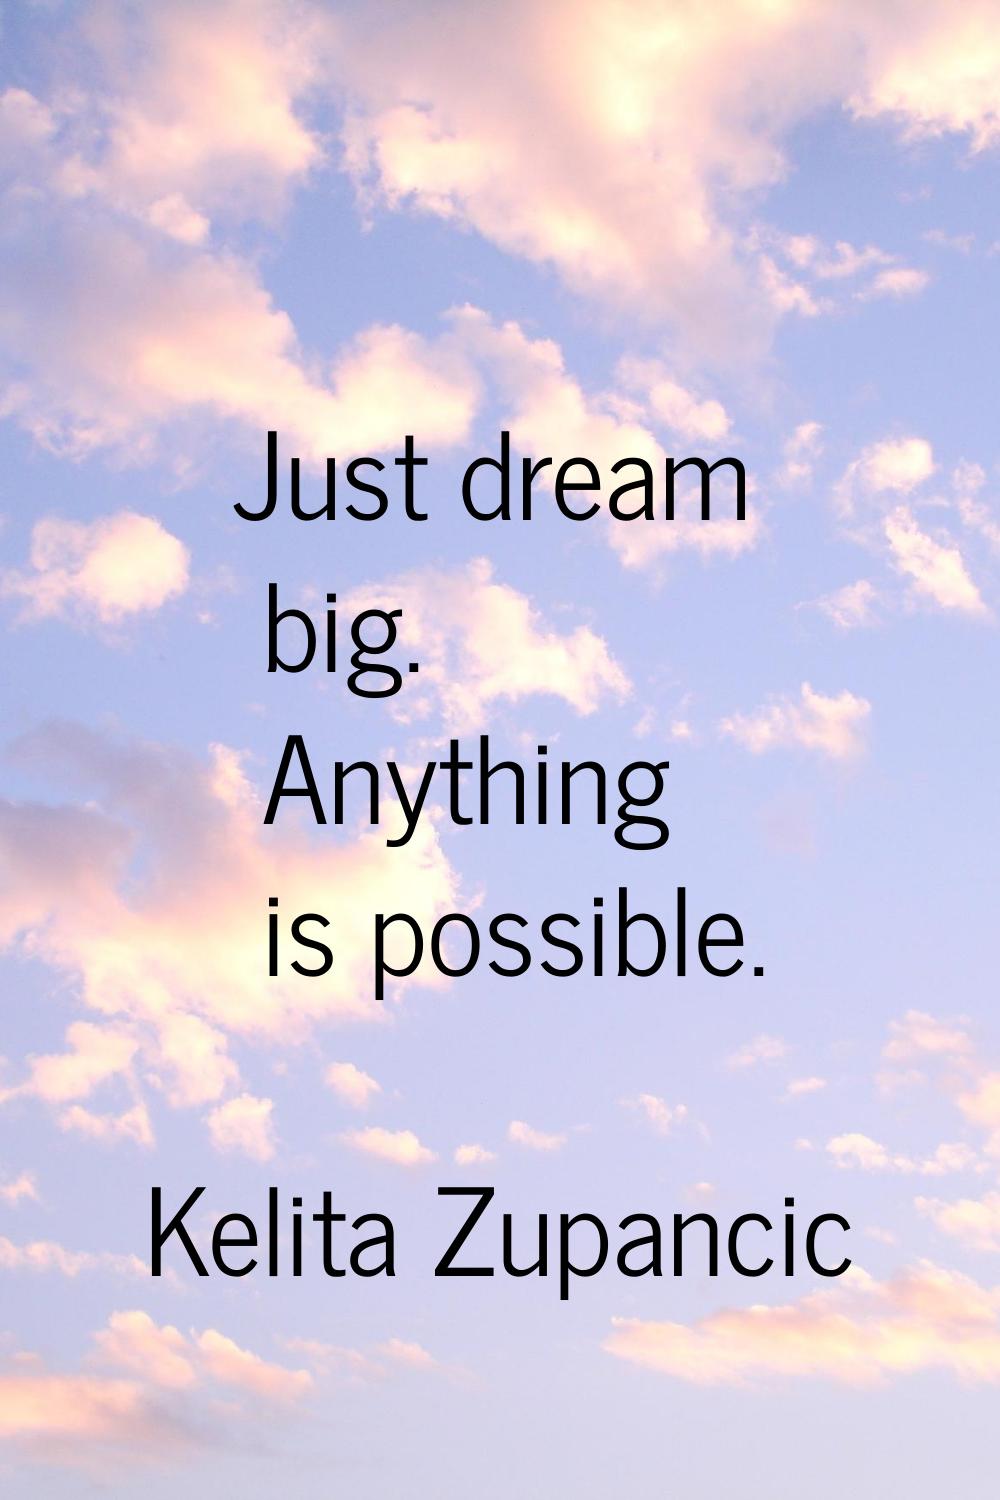 Just dream big. Anything is possible.